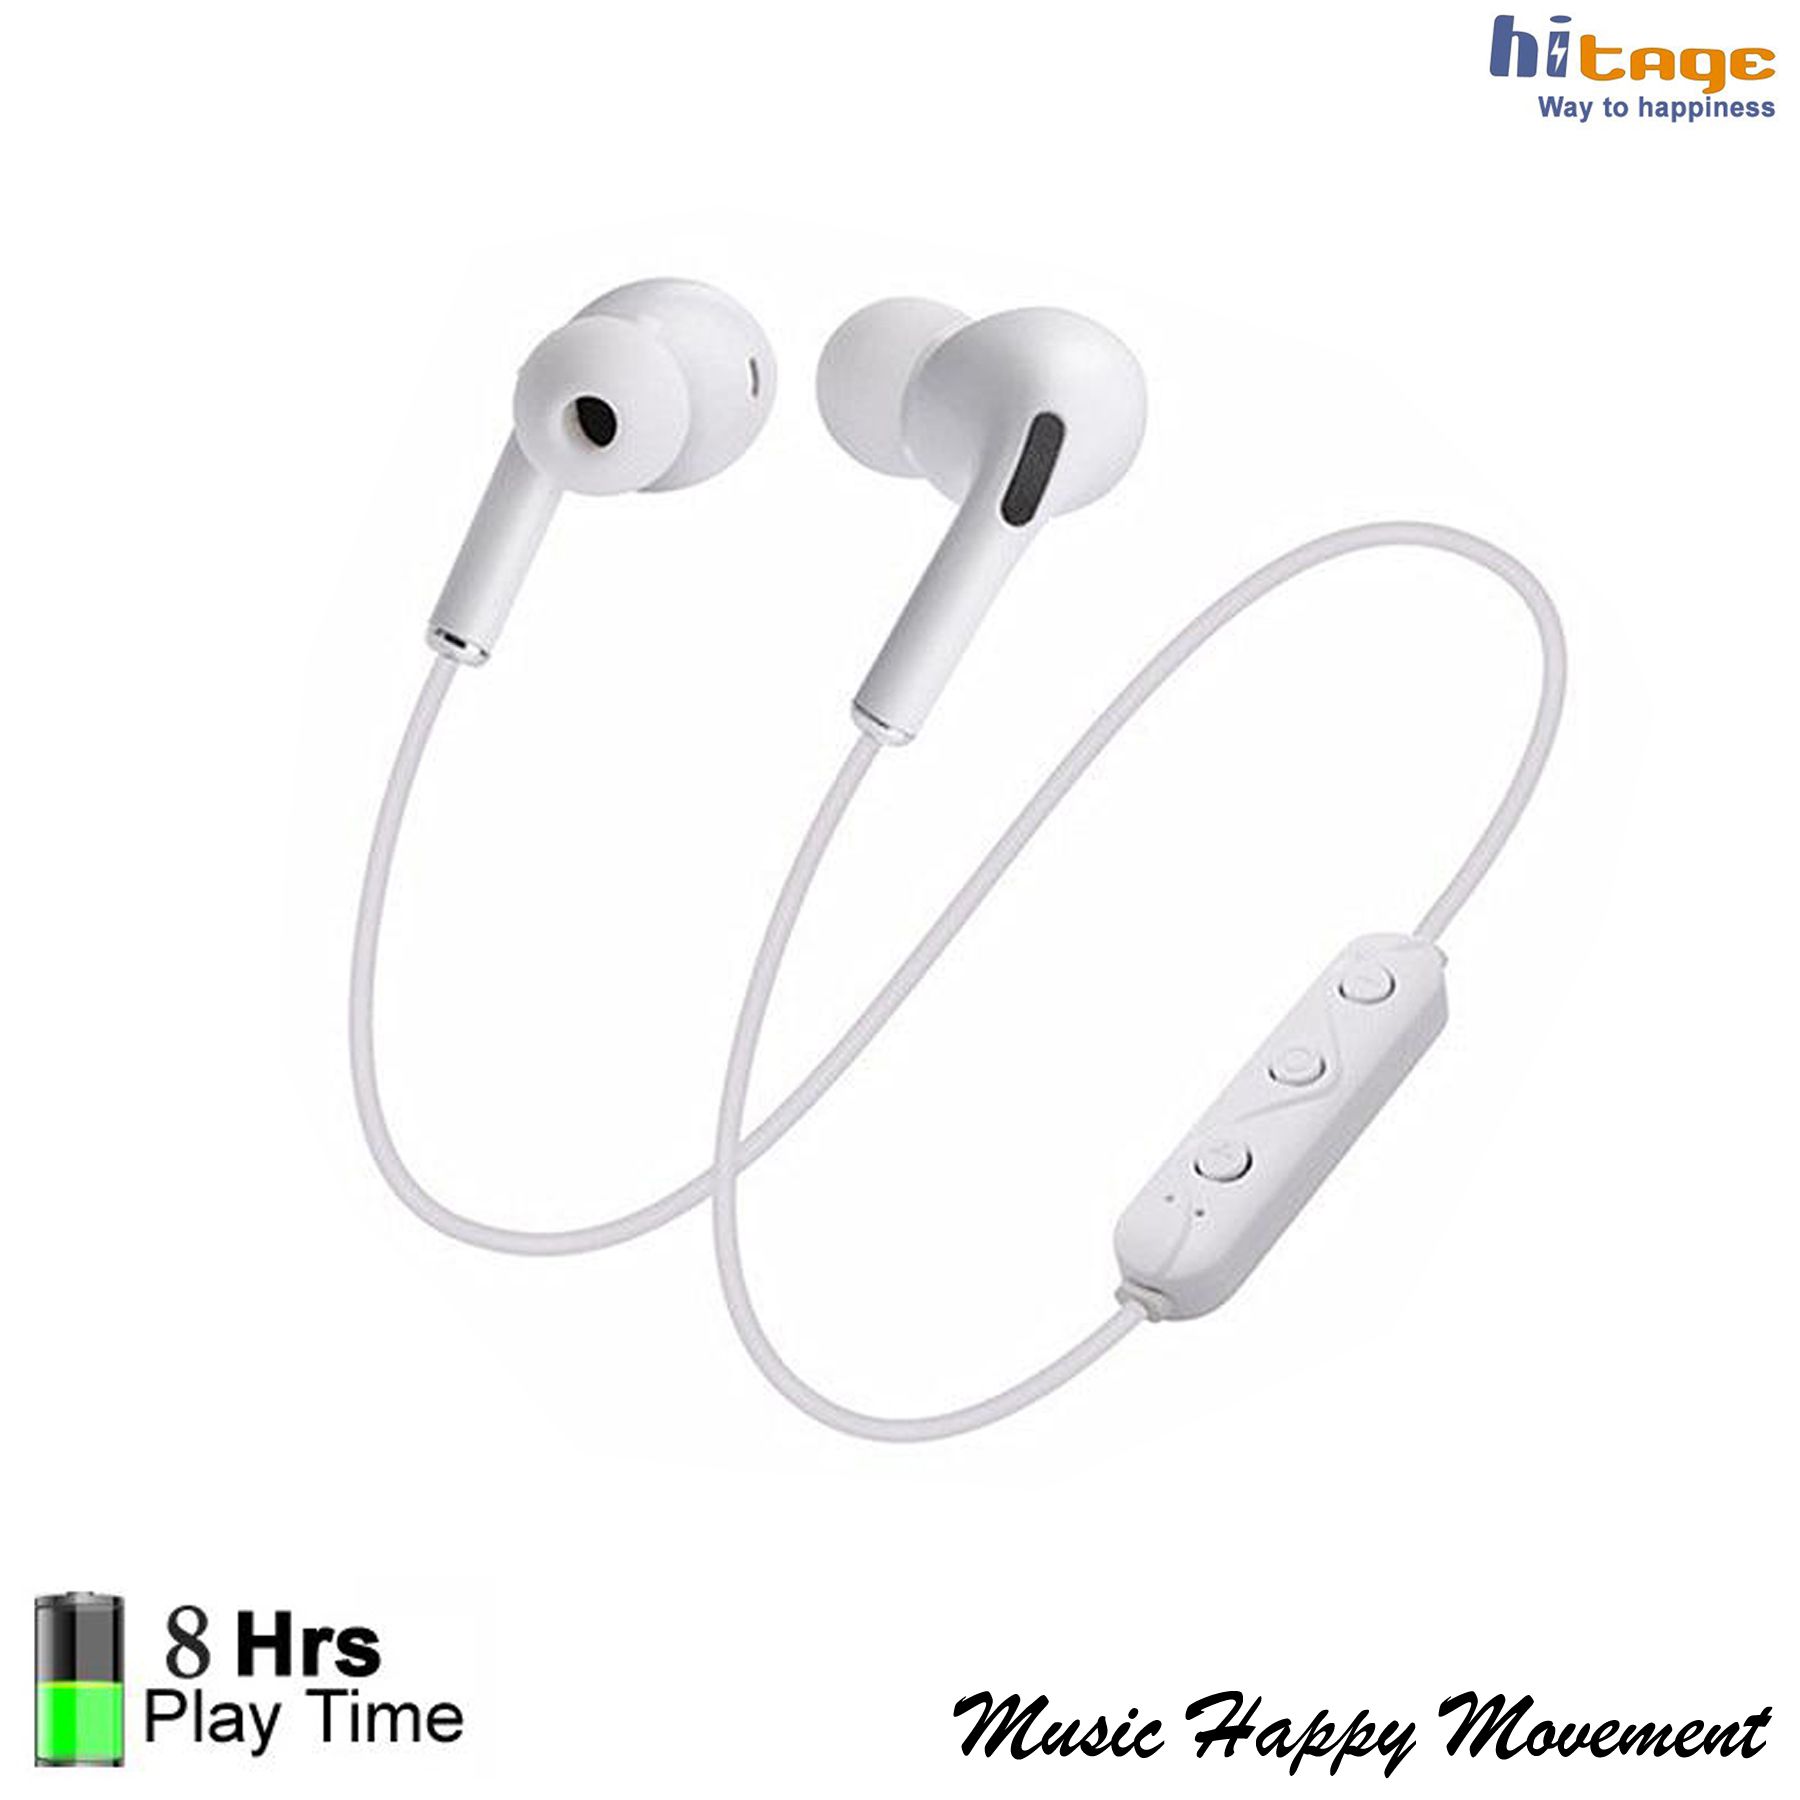 Vippo MBT-154 (18 HOURS LONG BATTERY Neckband Wireless With Mic Headphones/Earphones White